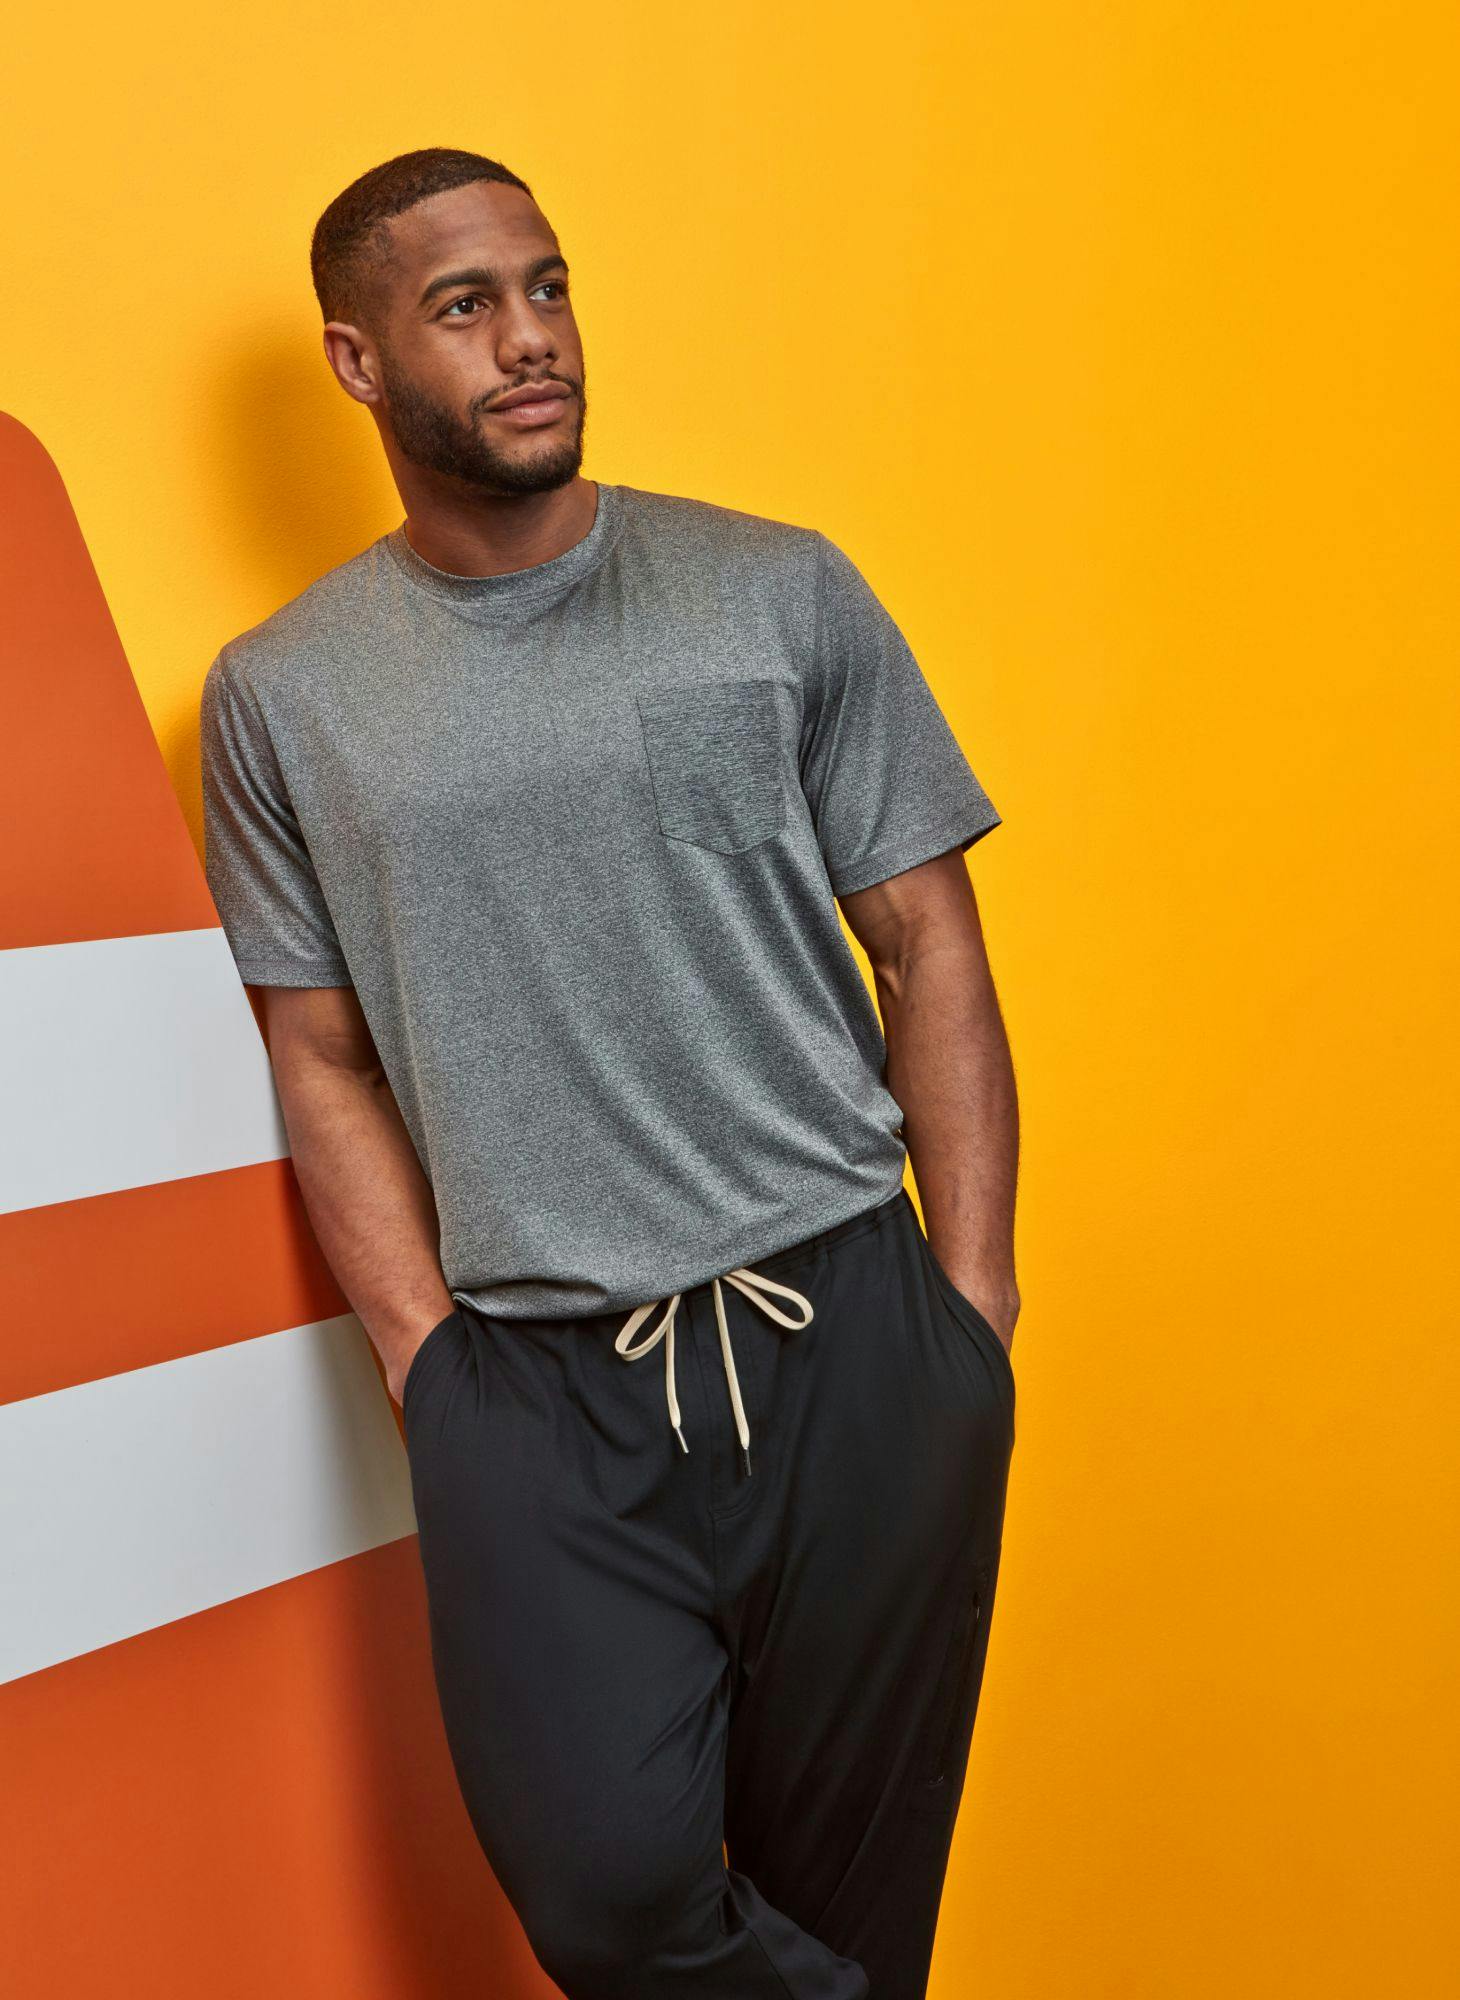 Man poses in activewear in front of a yellow and orange background